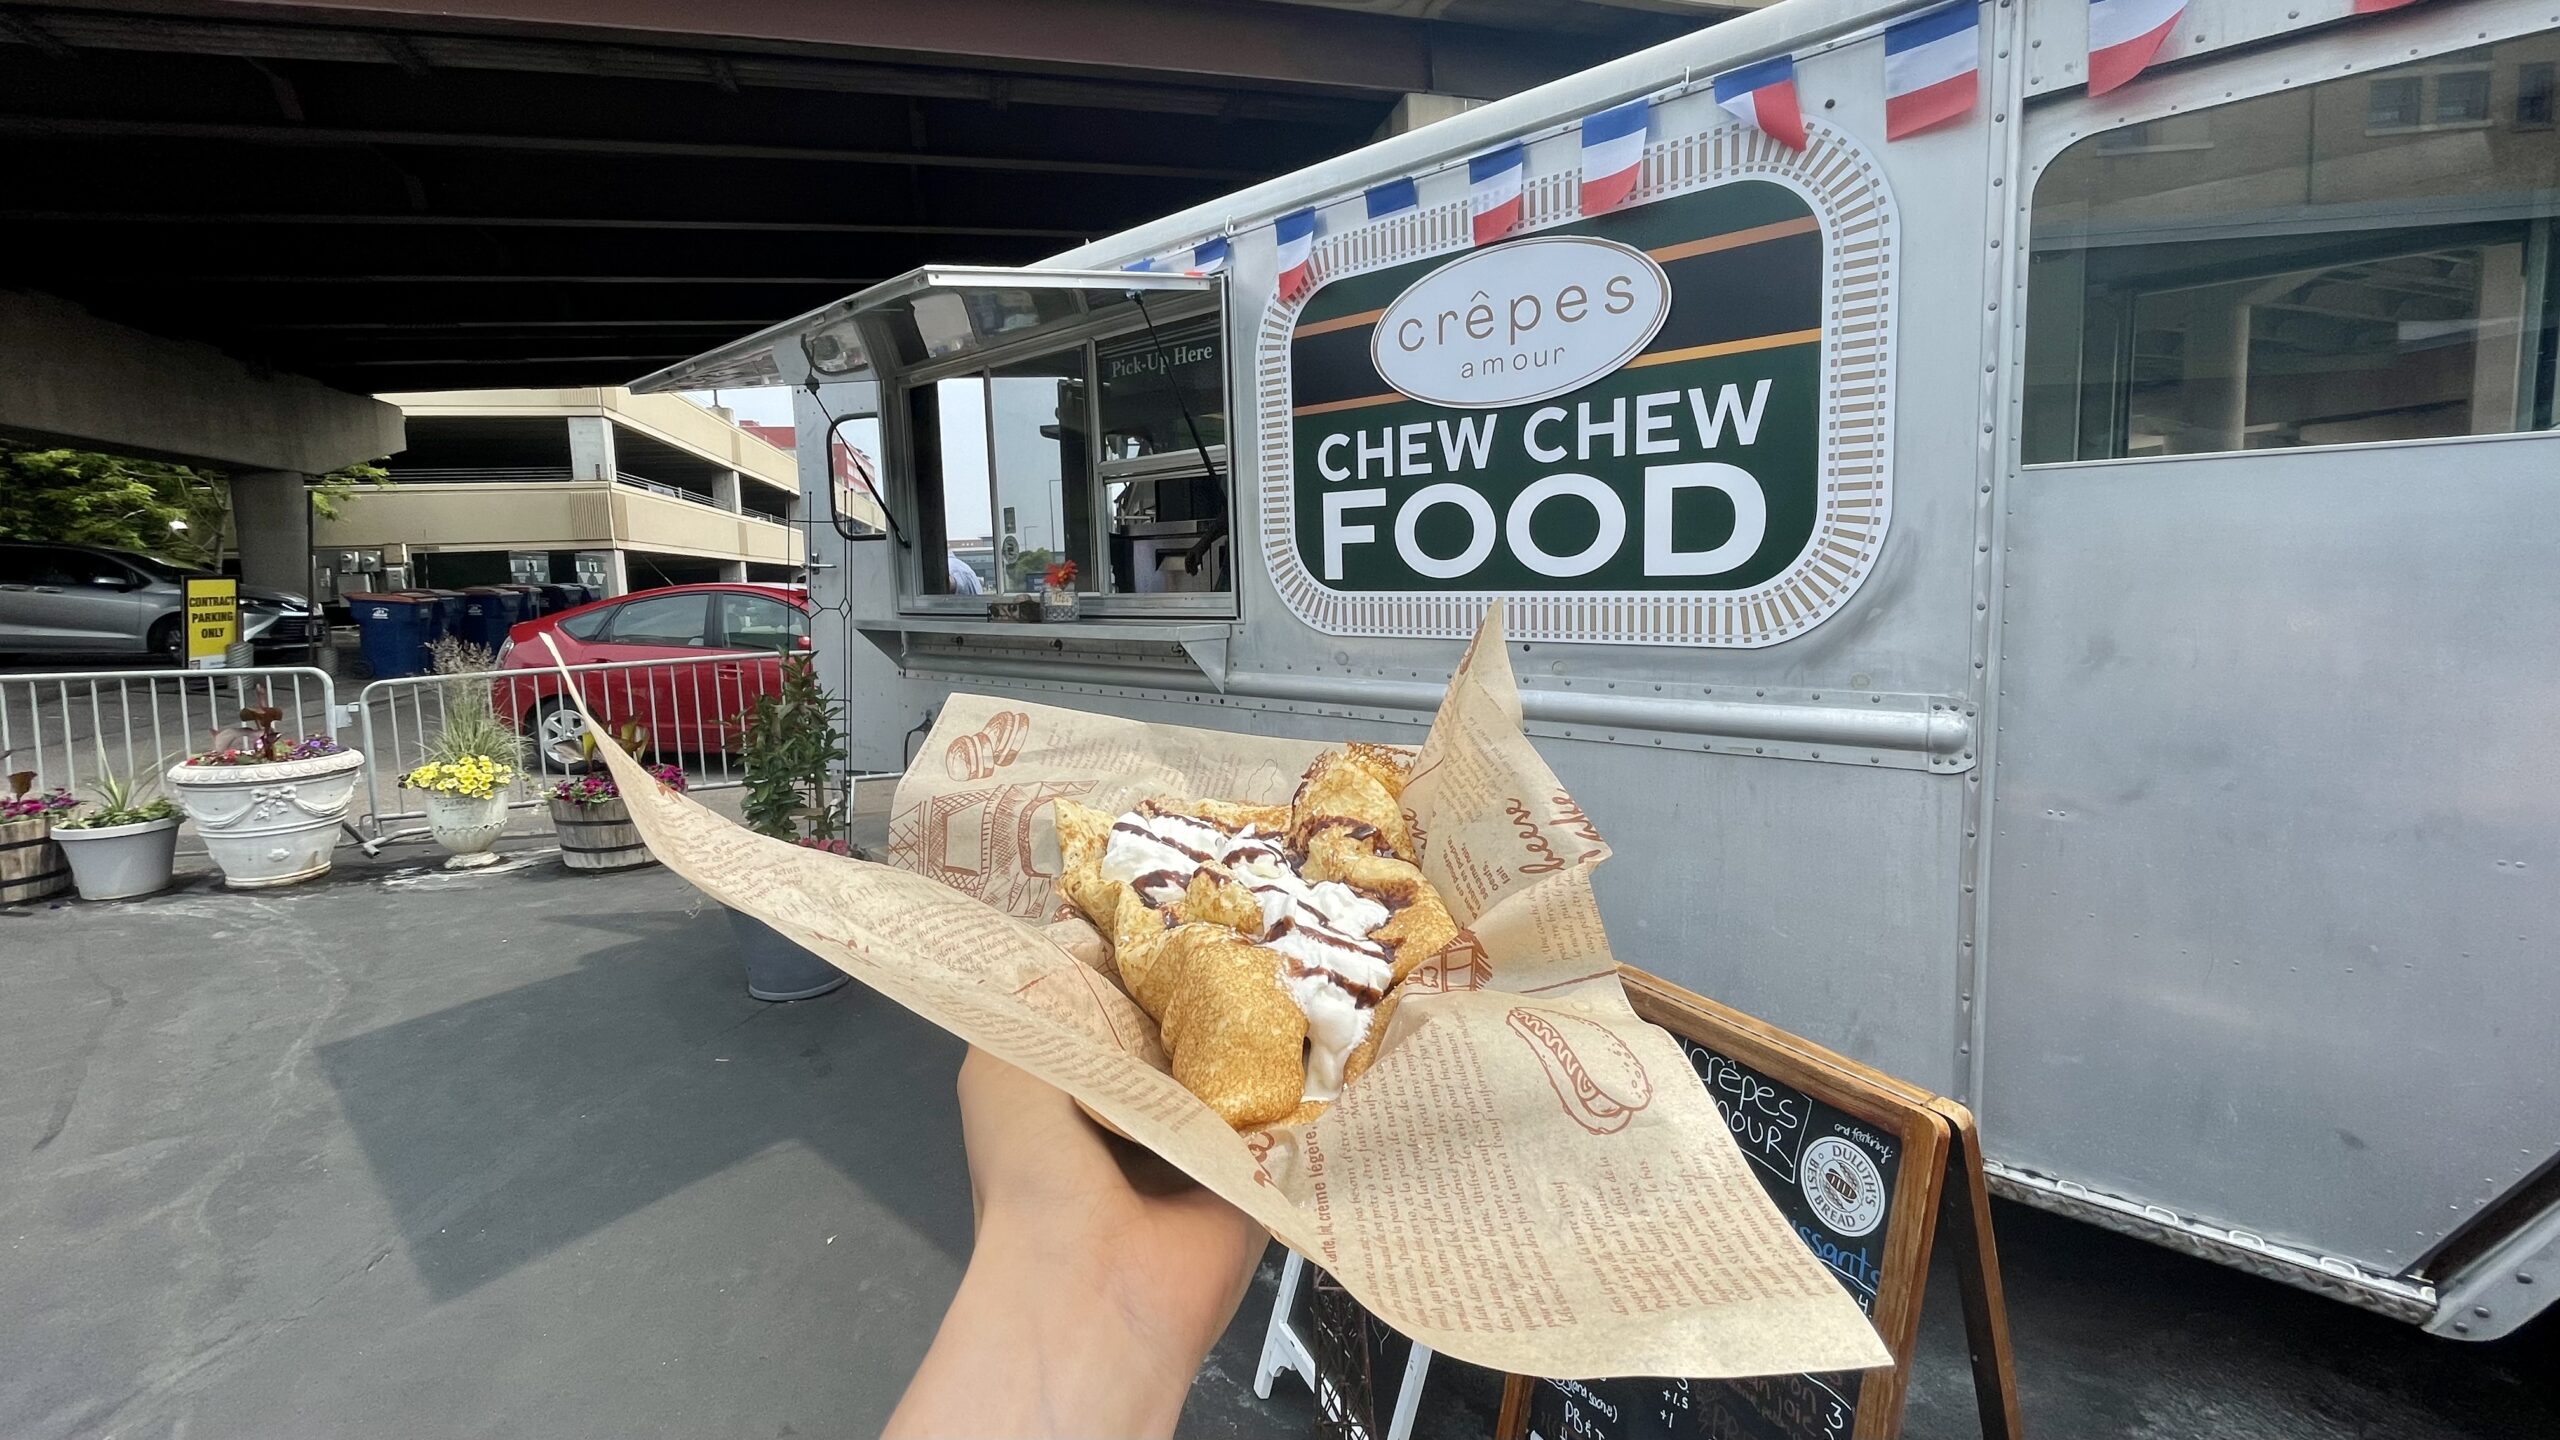 A crepe in front of the Crepes Amour food truck